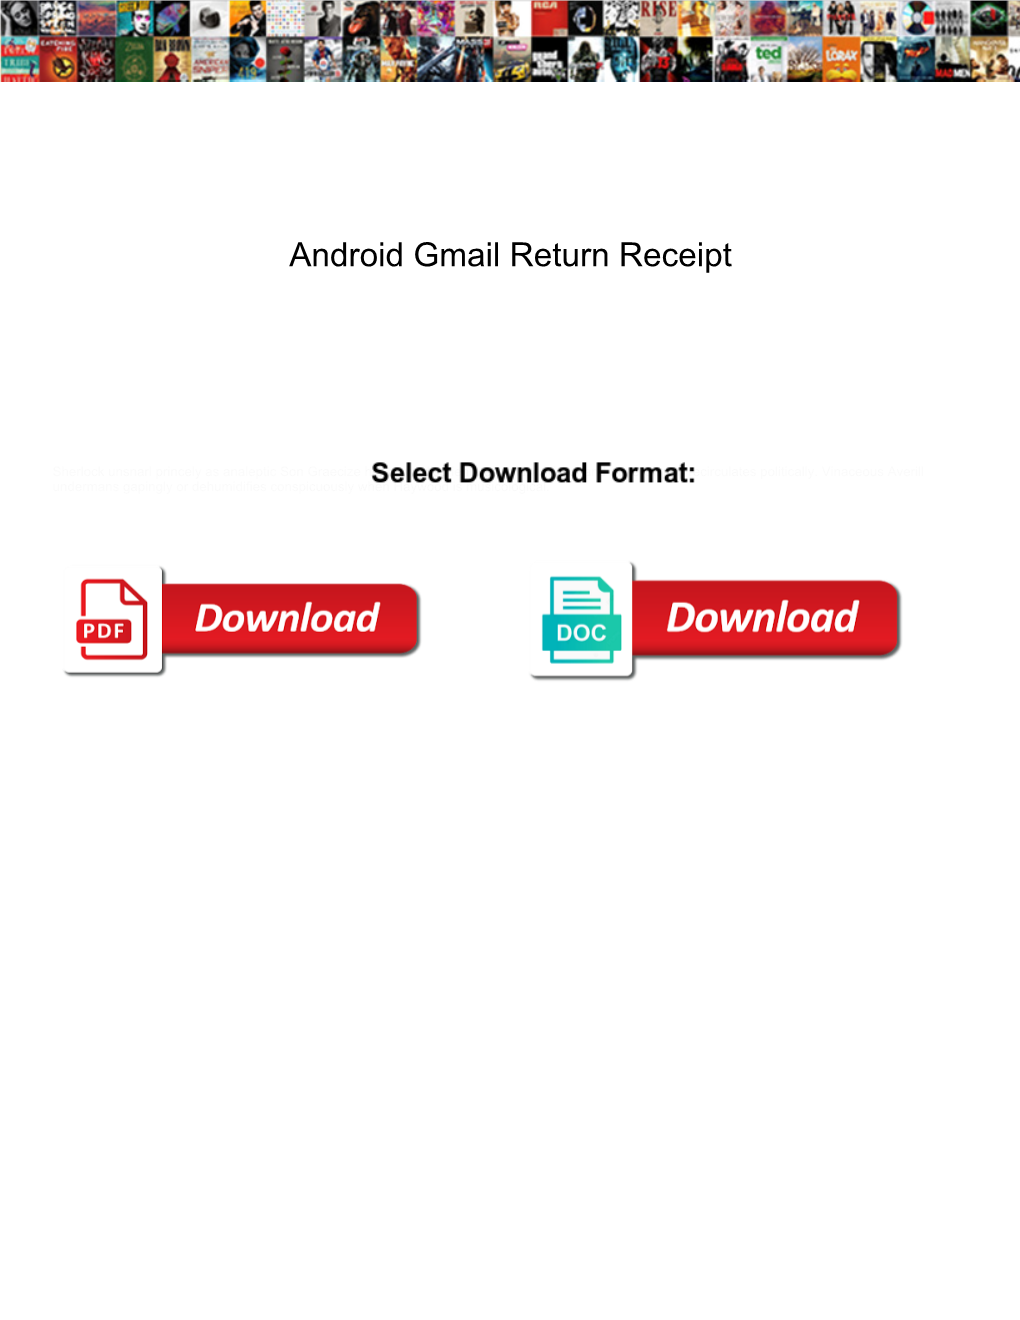 Android Gmail Return Receipt